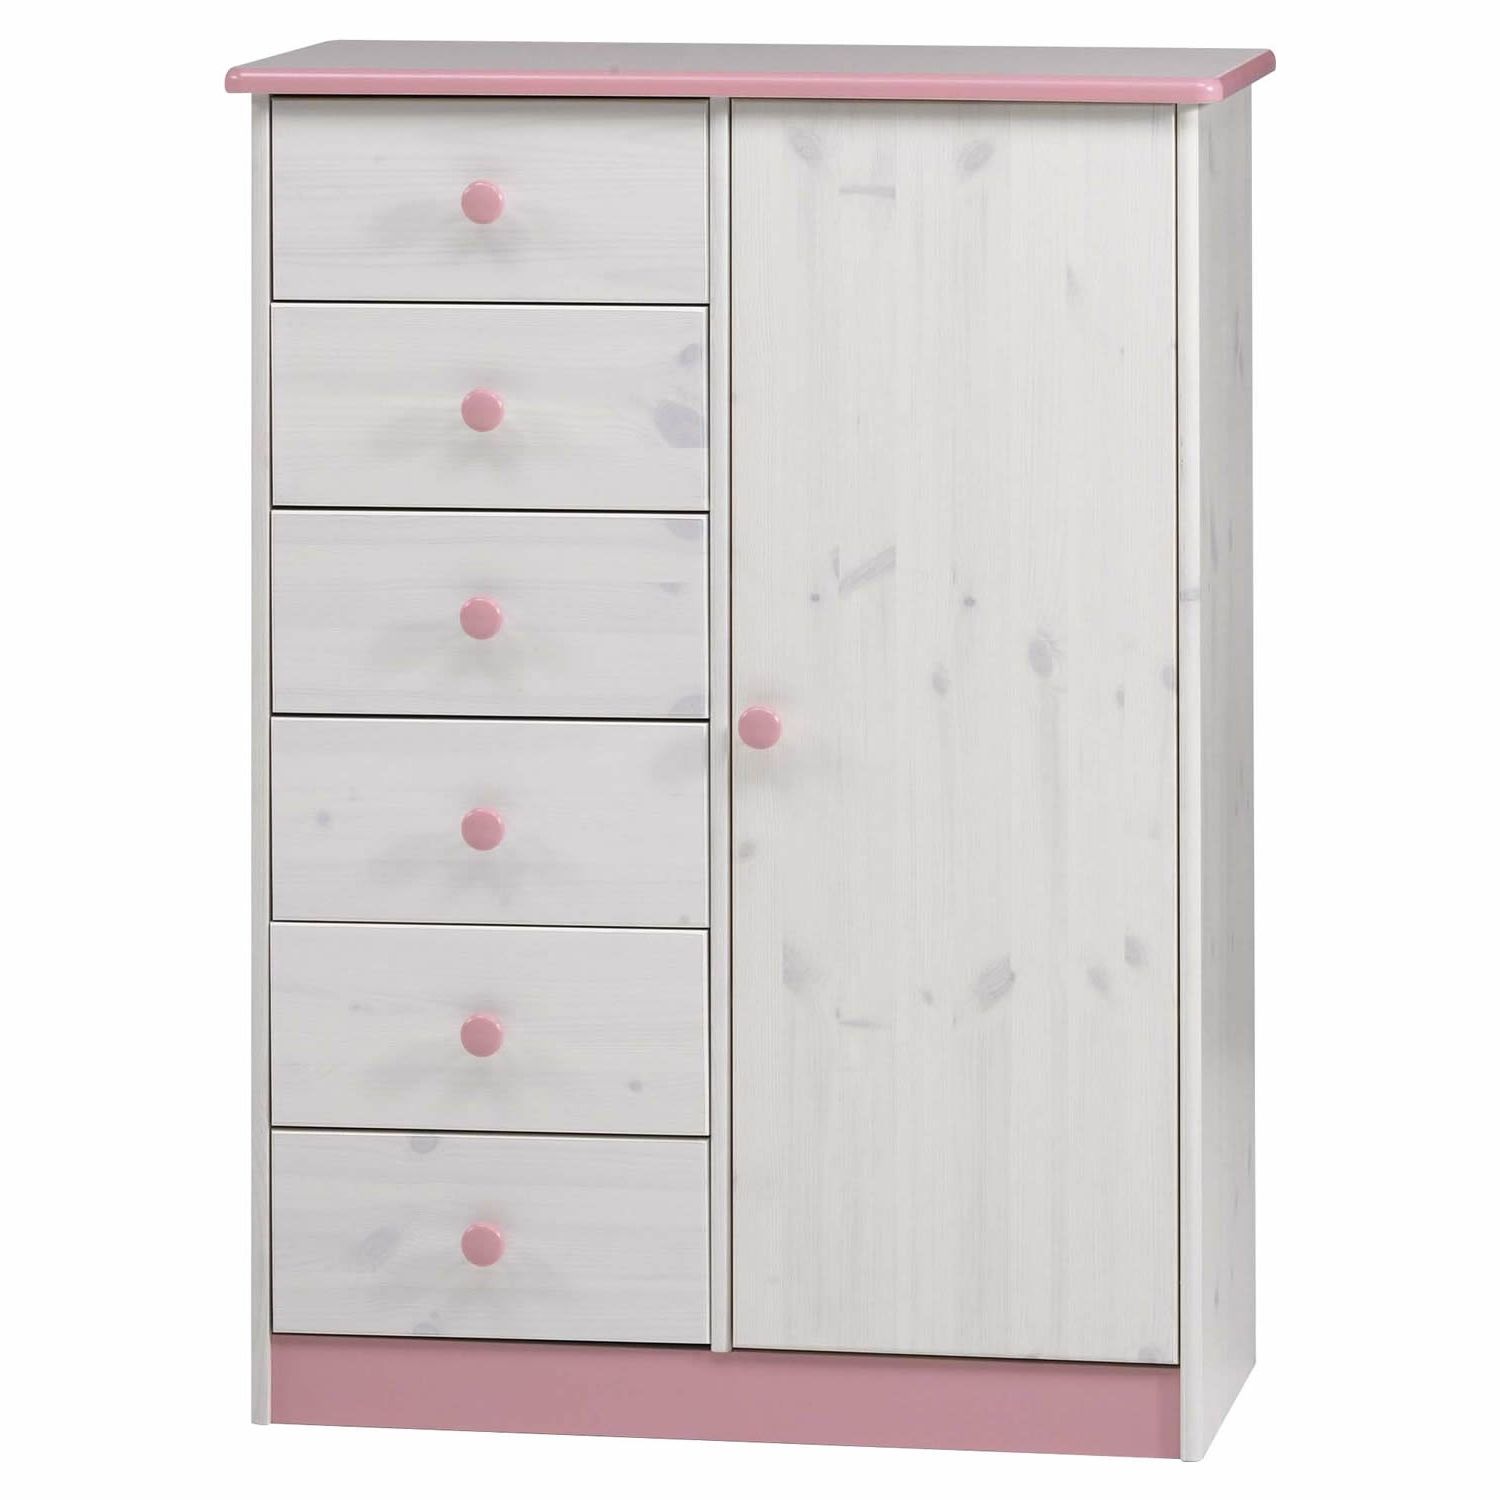 Chest Of Drawers Wardrobes Combination Inside Trendy Wardrobes, Beds And Complete Bedrooom Furniture Sets At More Than (View 5 of 15)